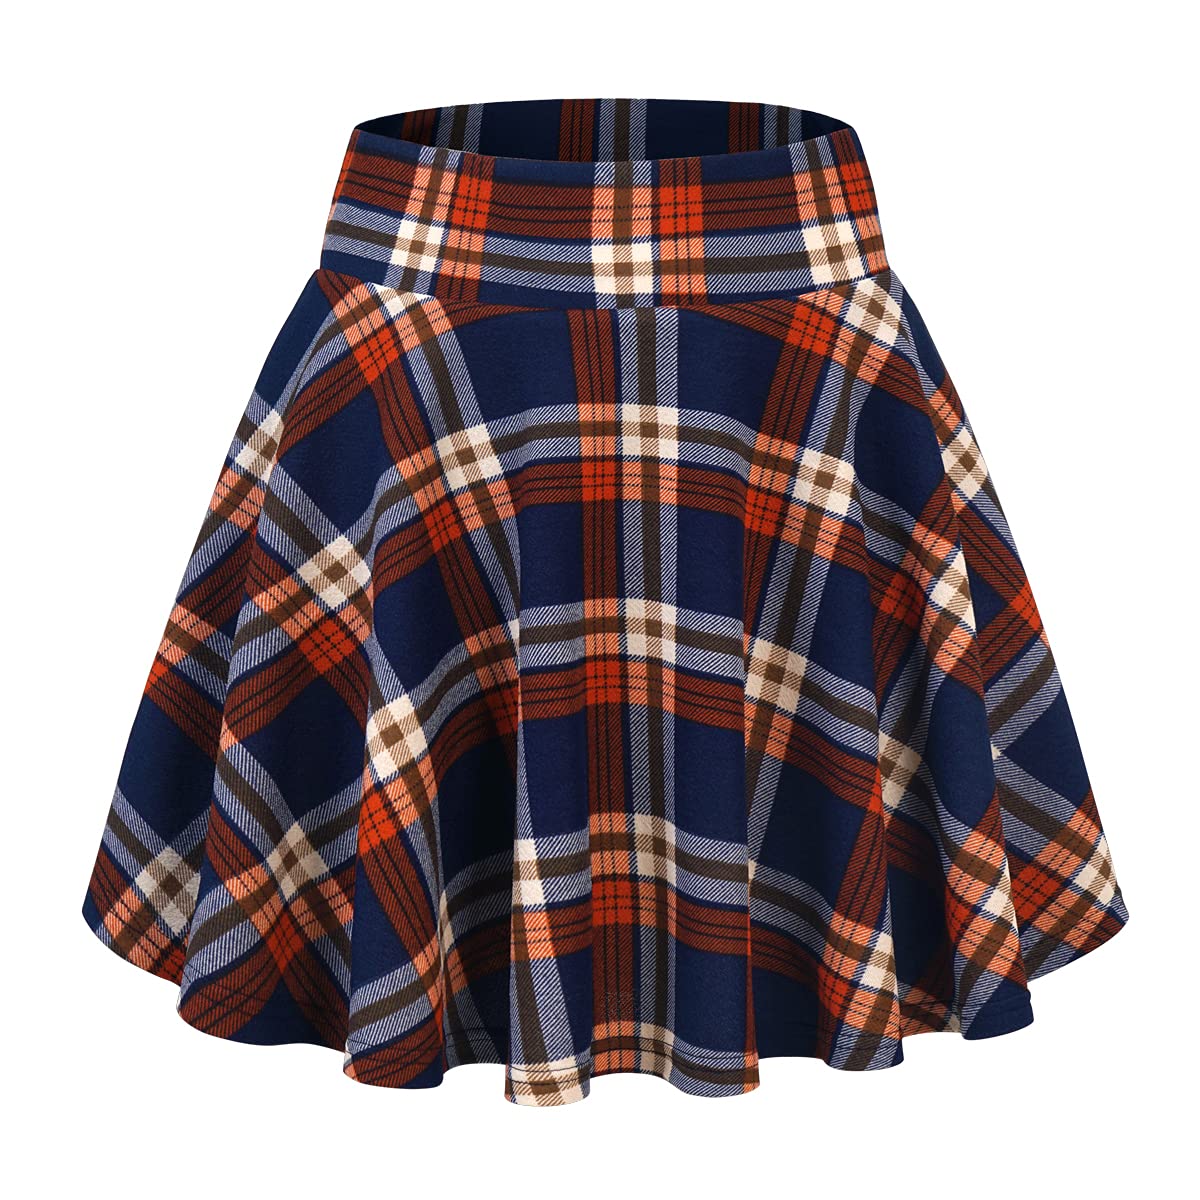 DJT Flared Pleated Navy Plaid Women's Casual Stretchy Mini Skater Skirt with Shorts